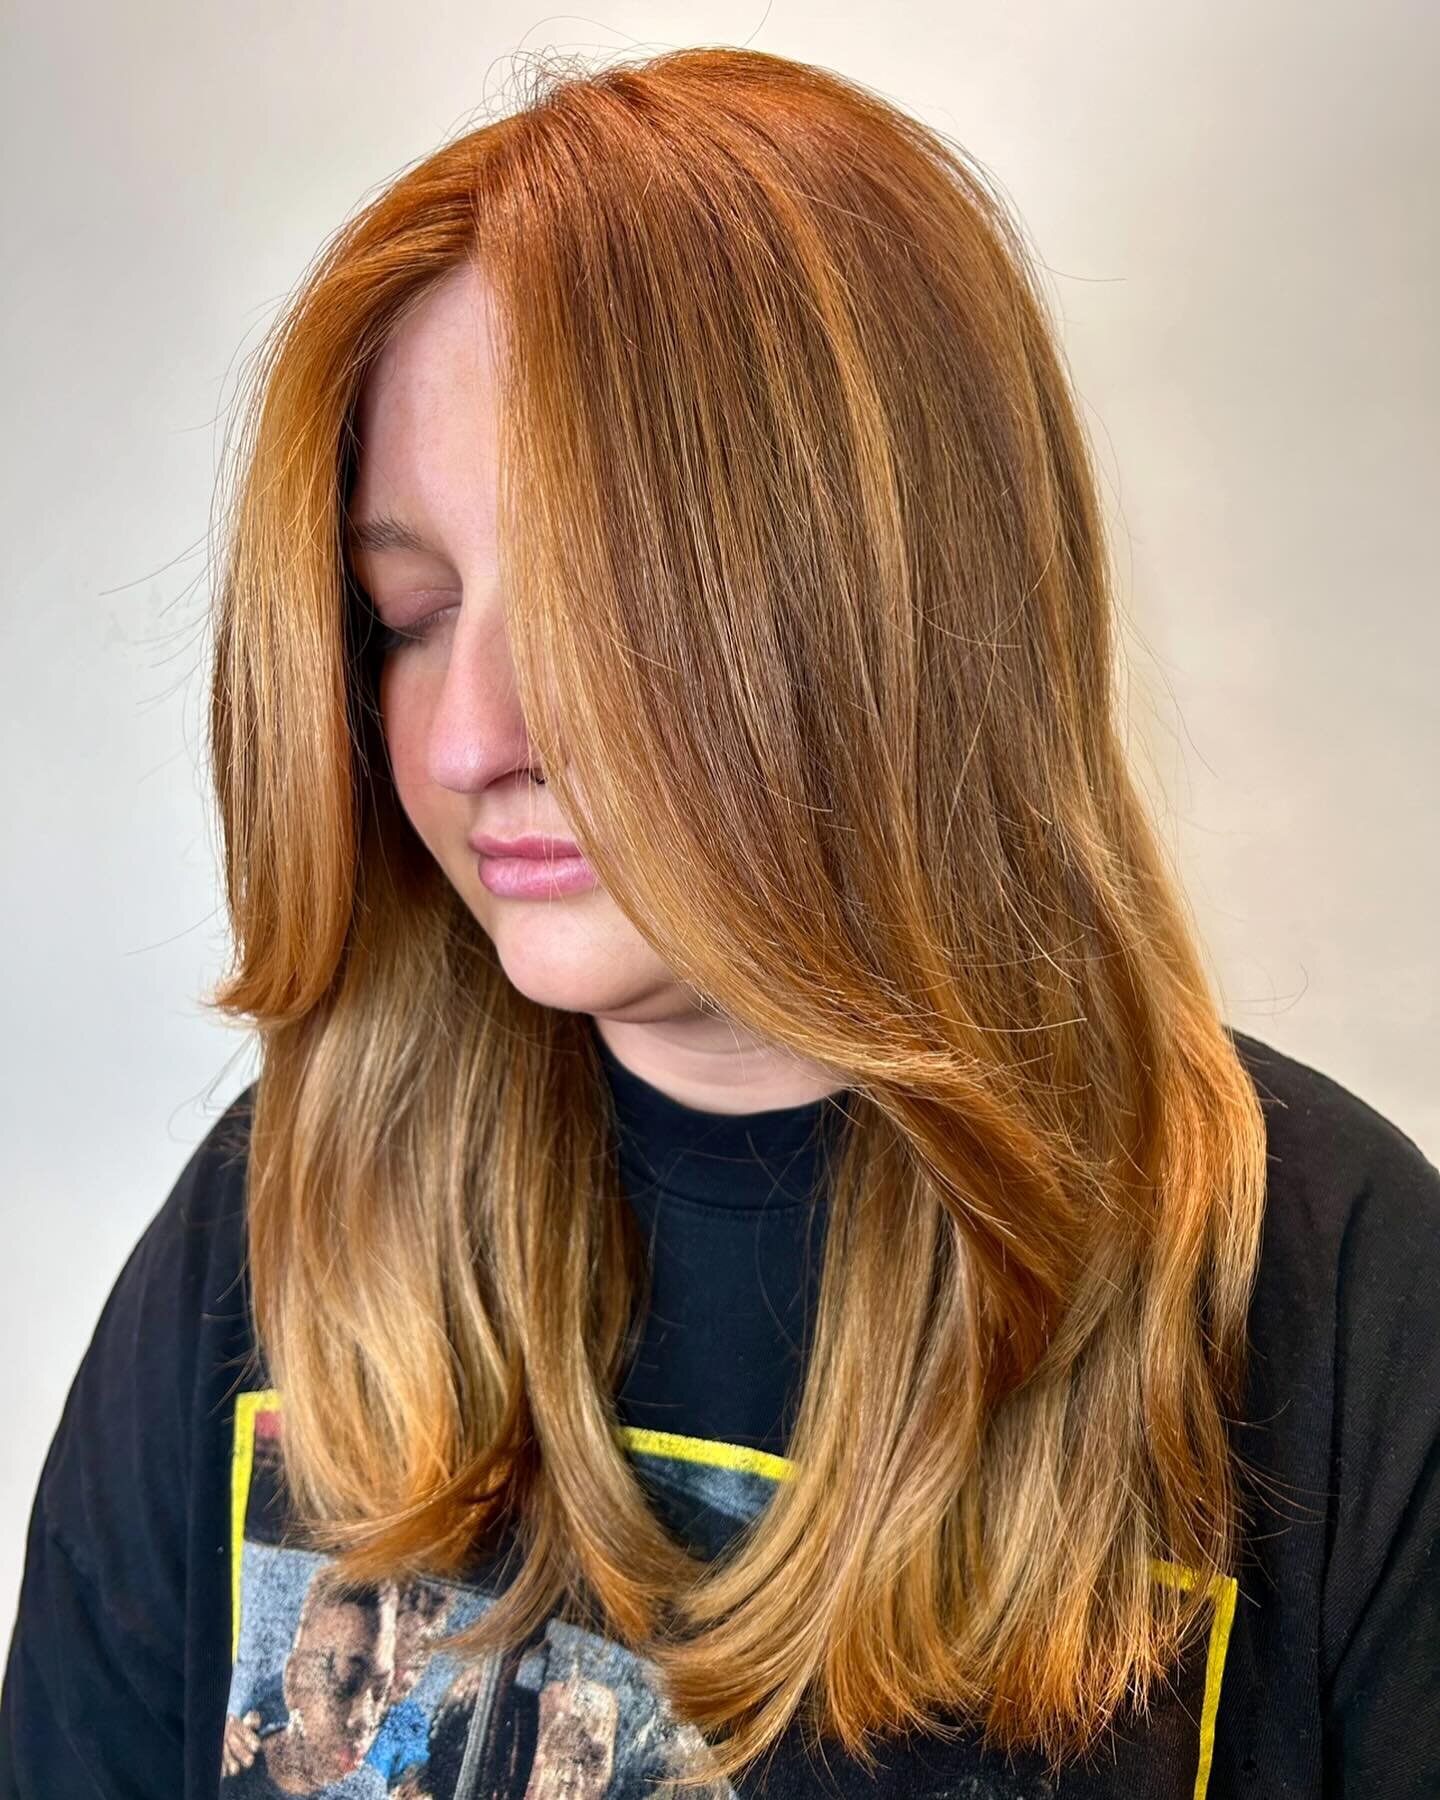 Show me the money honey! All about our money piece this season 🫰

#balayagehighlights #moneypiece #paintedhair #copperhaircolor #professional #prodessionalhairstylist #wellahair #salon #lexingtonkentucky #springhaircolor #copperhair #hairgoals